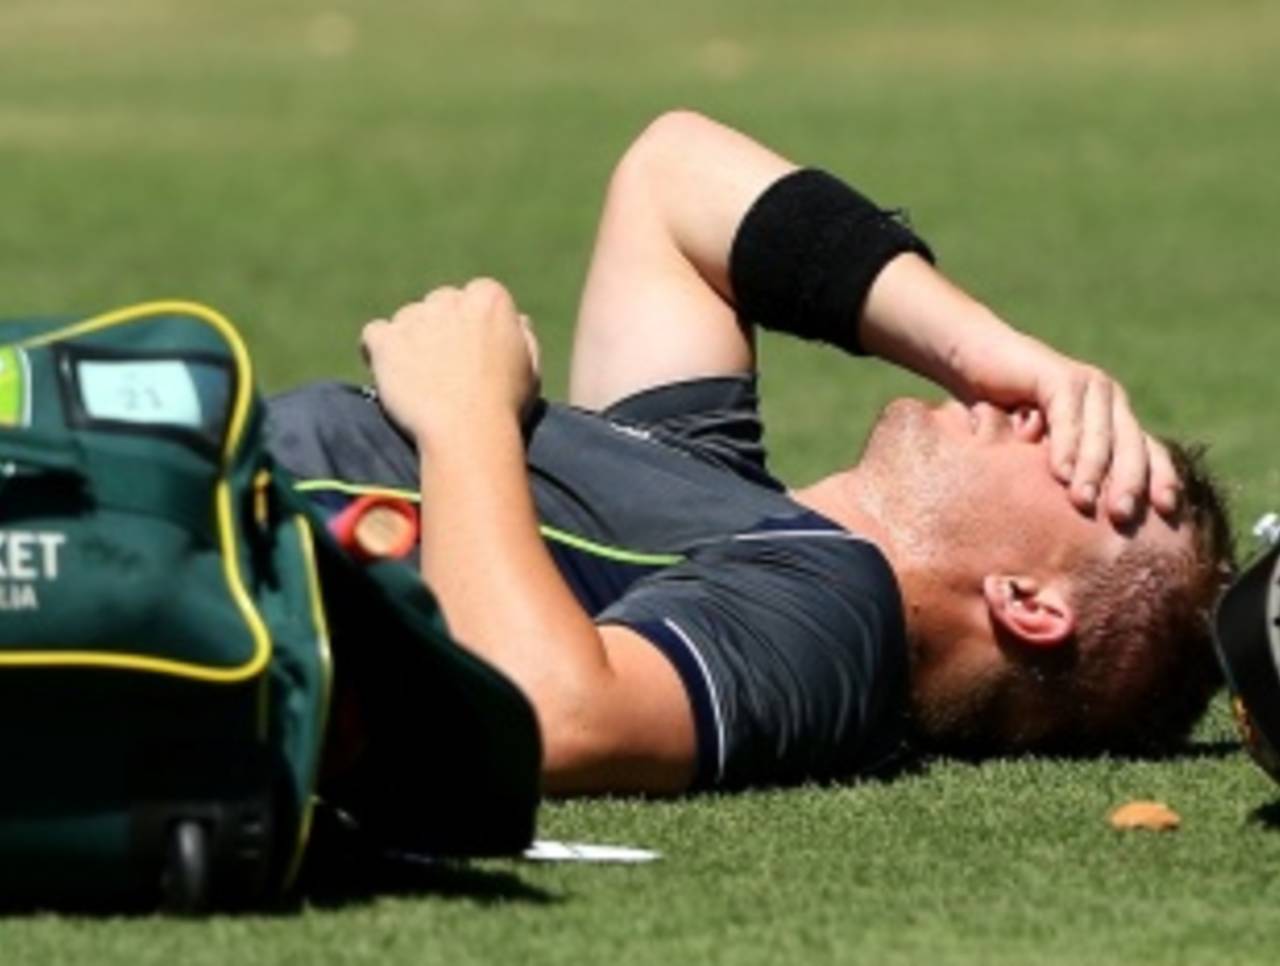 David Warner lies on the ground after getting hit on the hand while batting during a net session, Perth, January 30, 2013